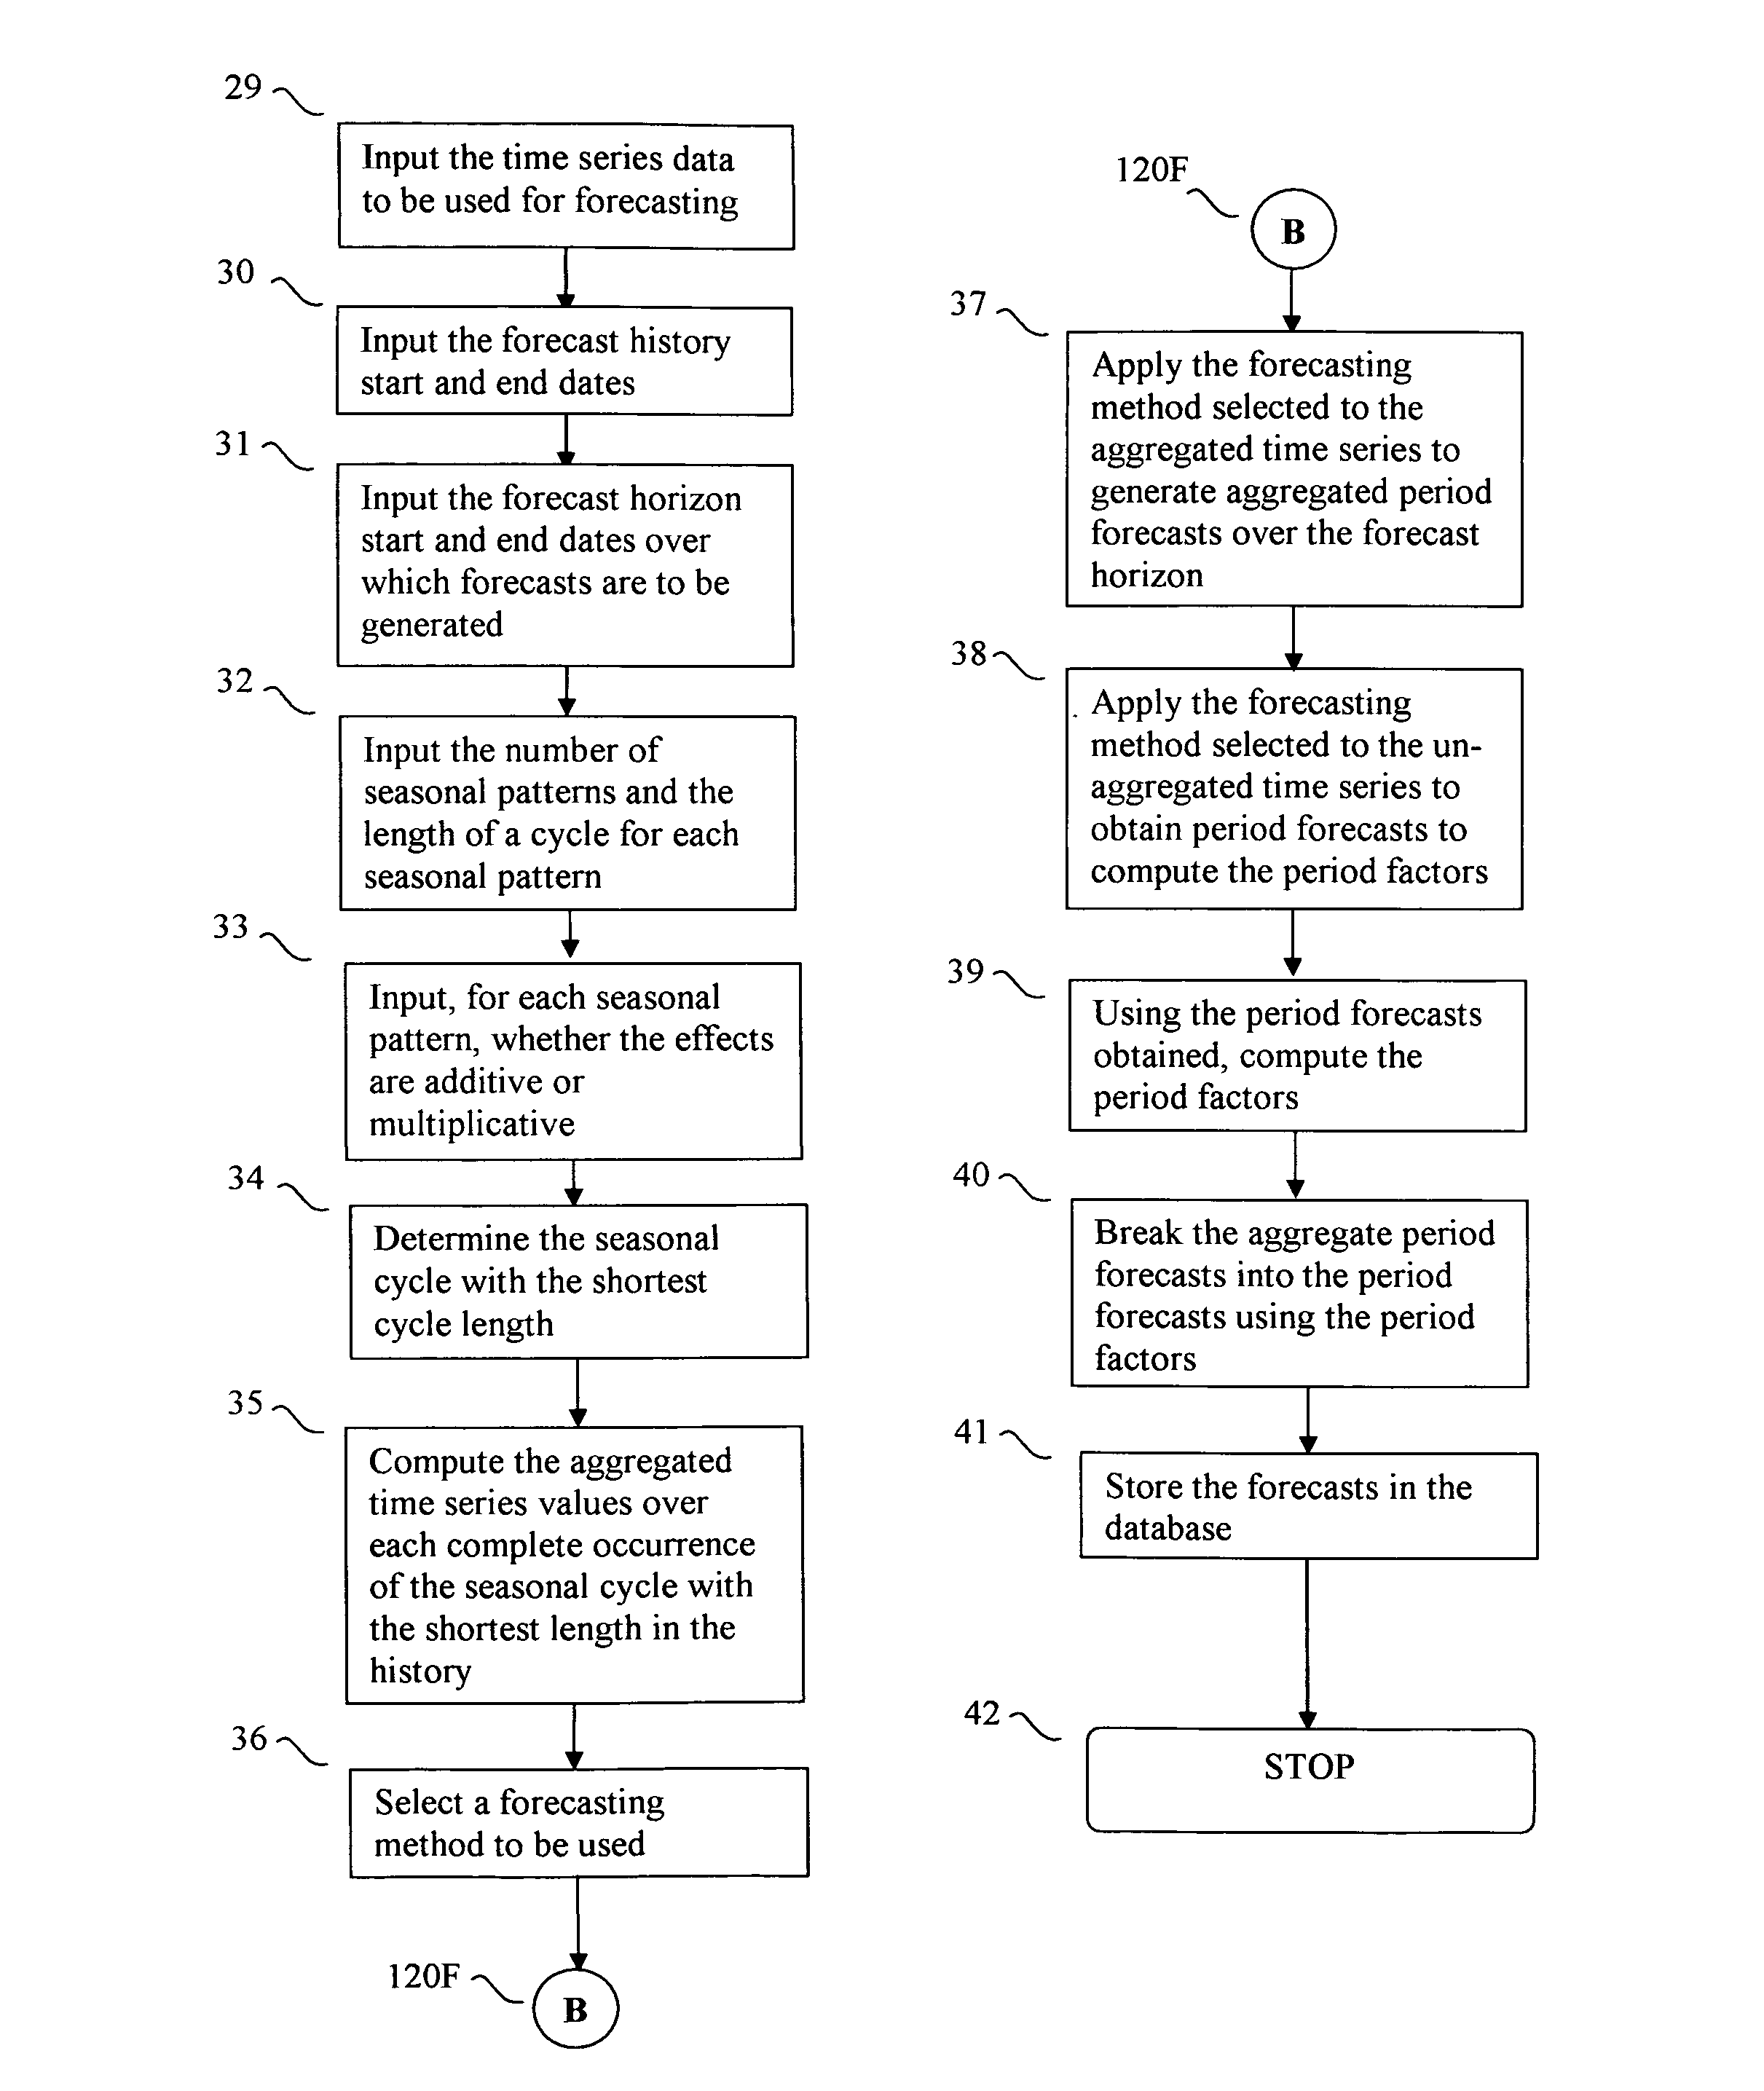 System and methods for forecasting time series with multiple seasonal patterns